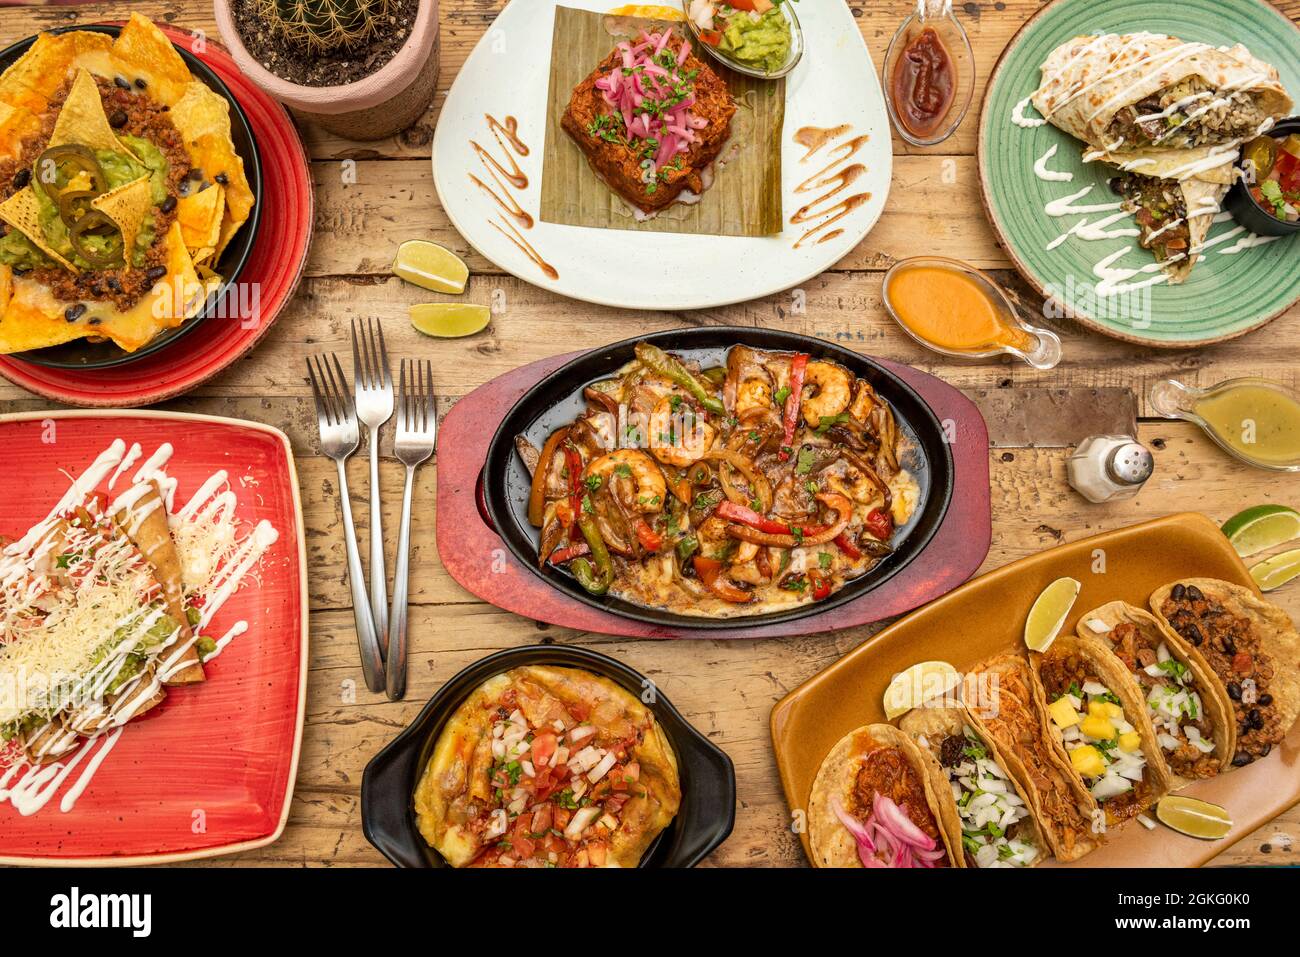 Great dishes of popular Mexican food. Tray with assorted tacos, beef wire, shrimp fajitas, golden tacos, nachos with guacamole and chili, full burrito Stock Photo